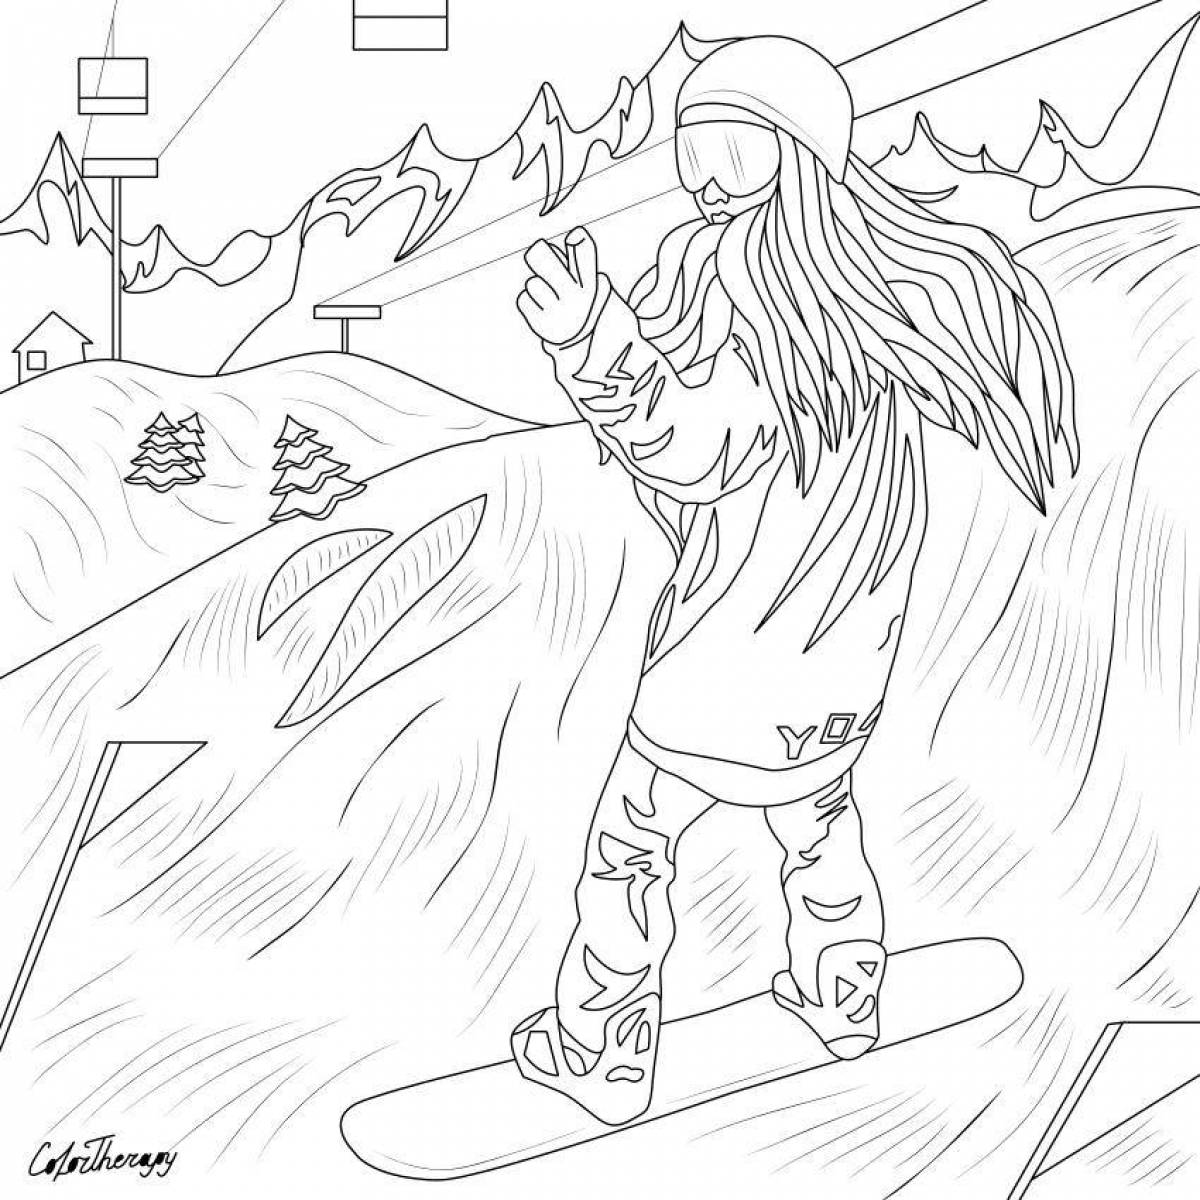 Cocky Snowboarder Coloring Page